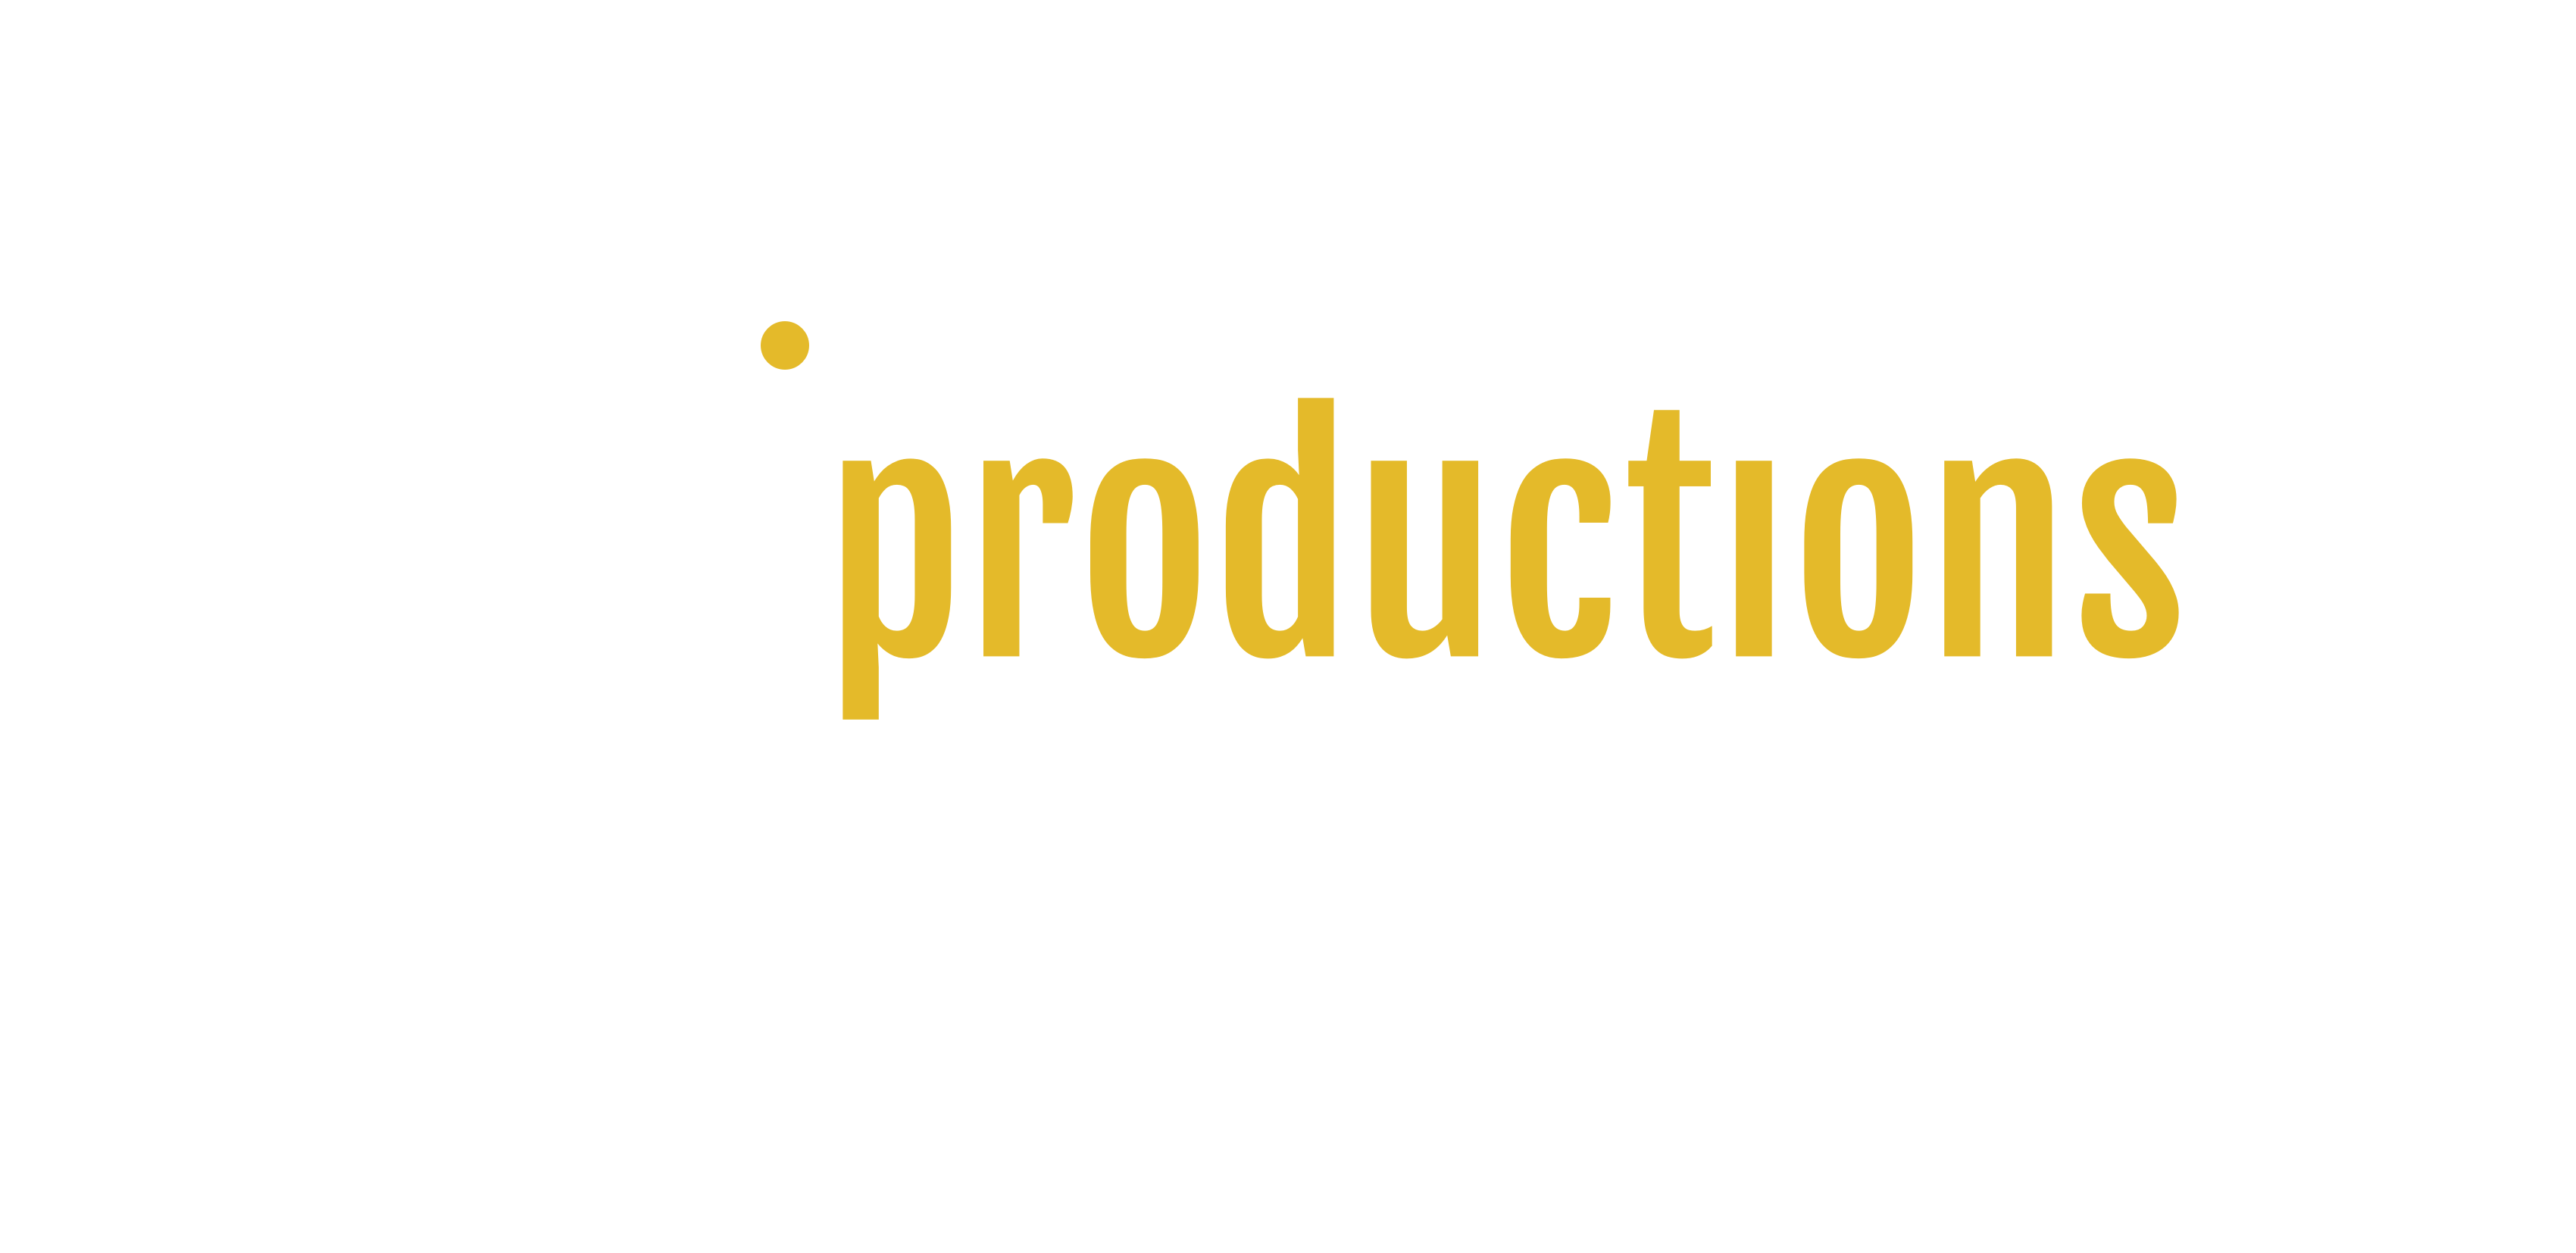 Gini Productions GbR